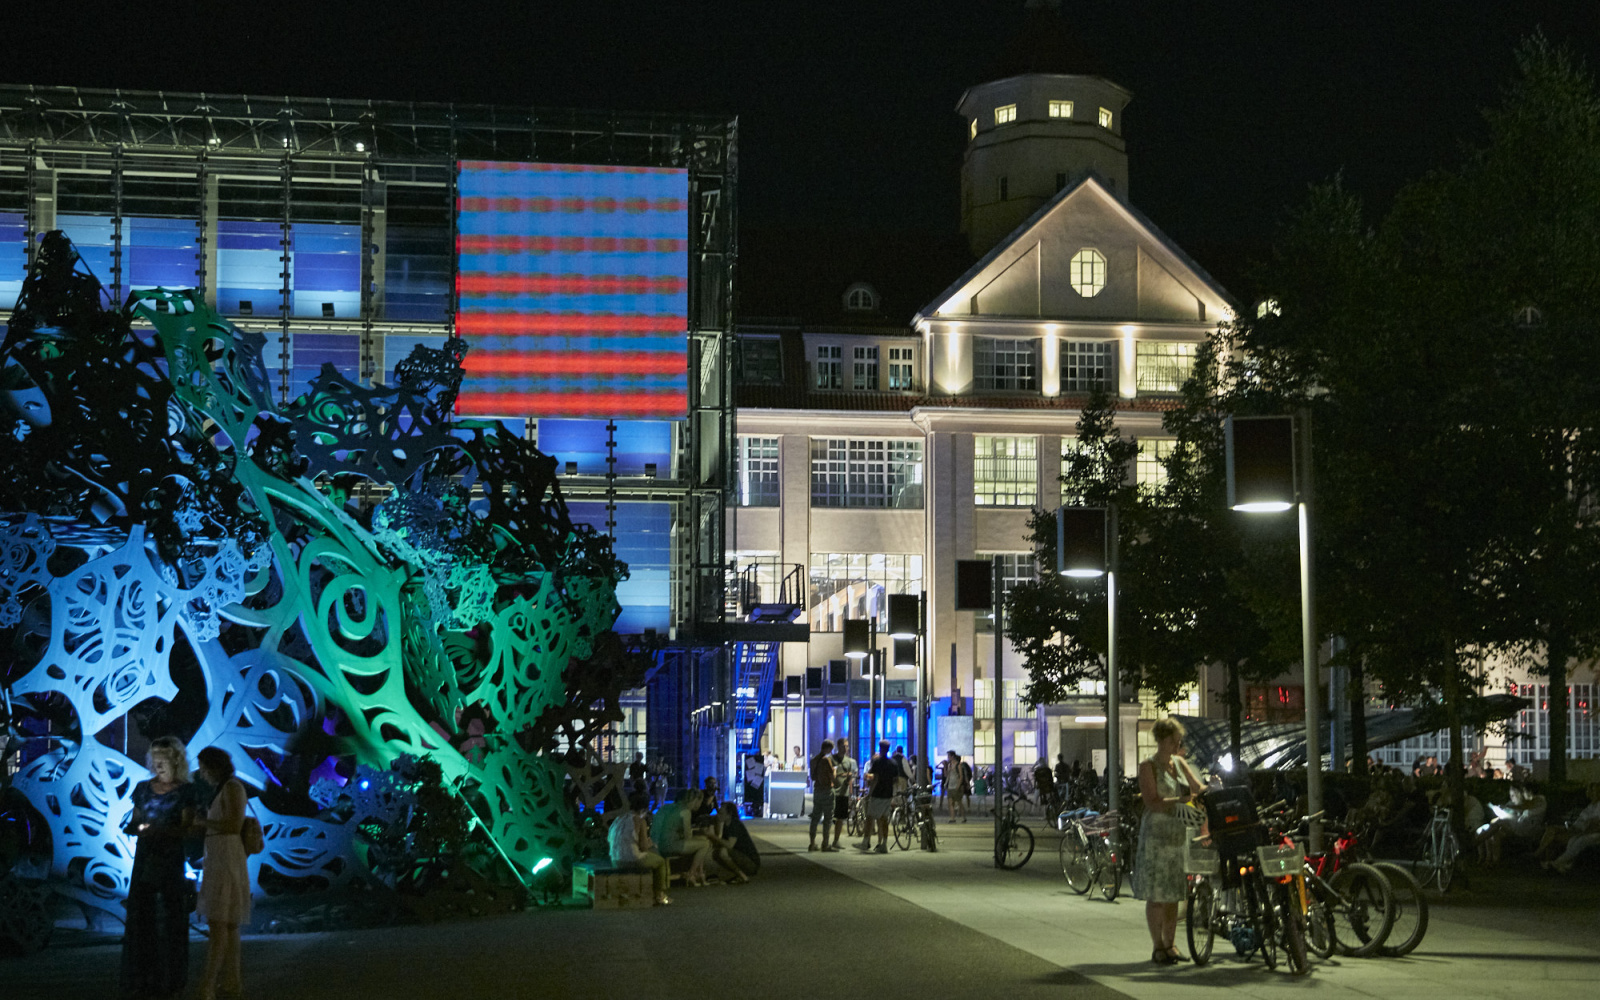 Hall building with an illuminated sculpture at night